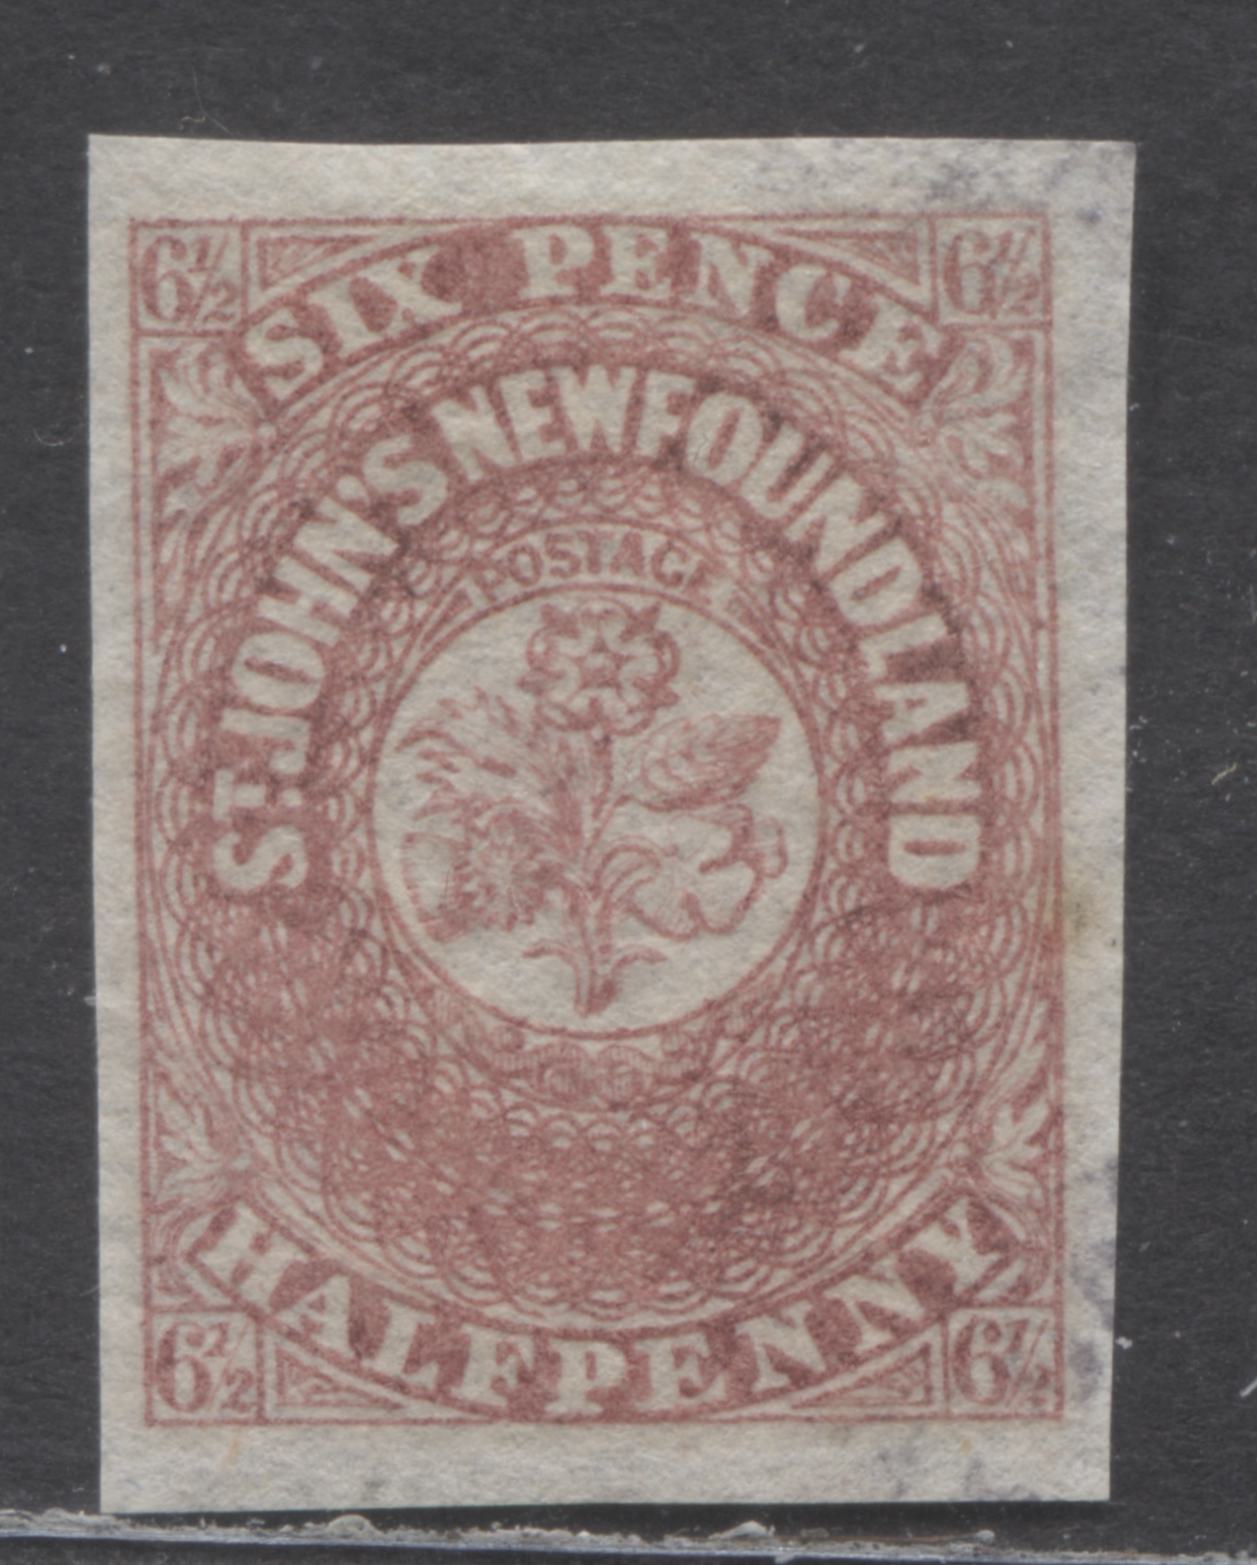 Lot 6 Newfoundland #21 6.5d Rose Heraldry & Flowers, 1861-1862 Third Pence Issue, A Very Fine Used Single On Crisp, Hard Paper, November 1861 Printing, Dubious Cancel So Estimated As Unused